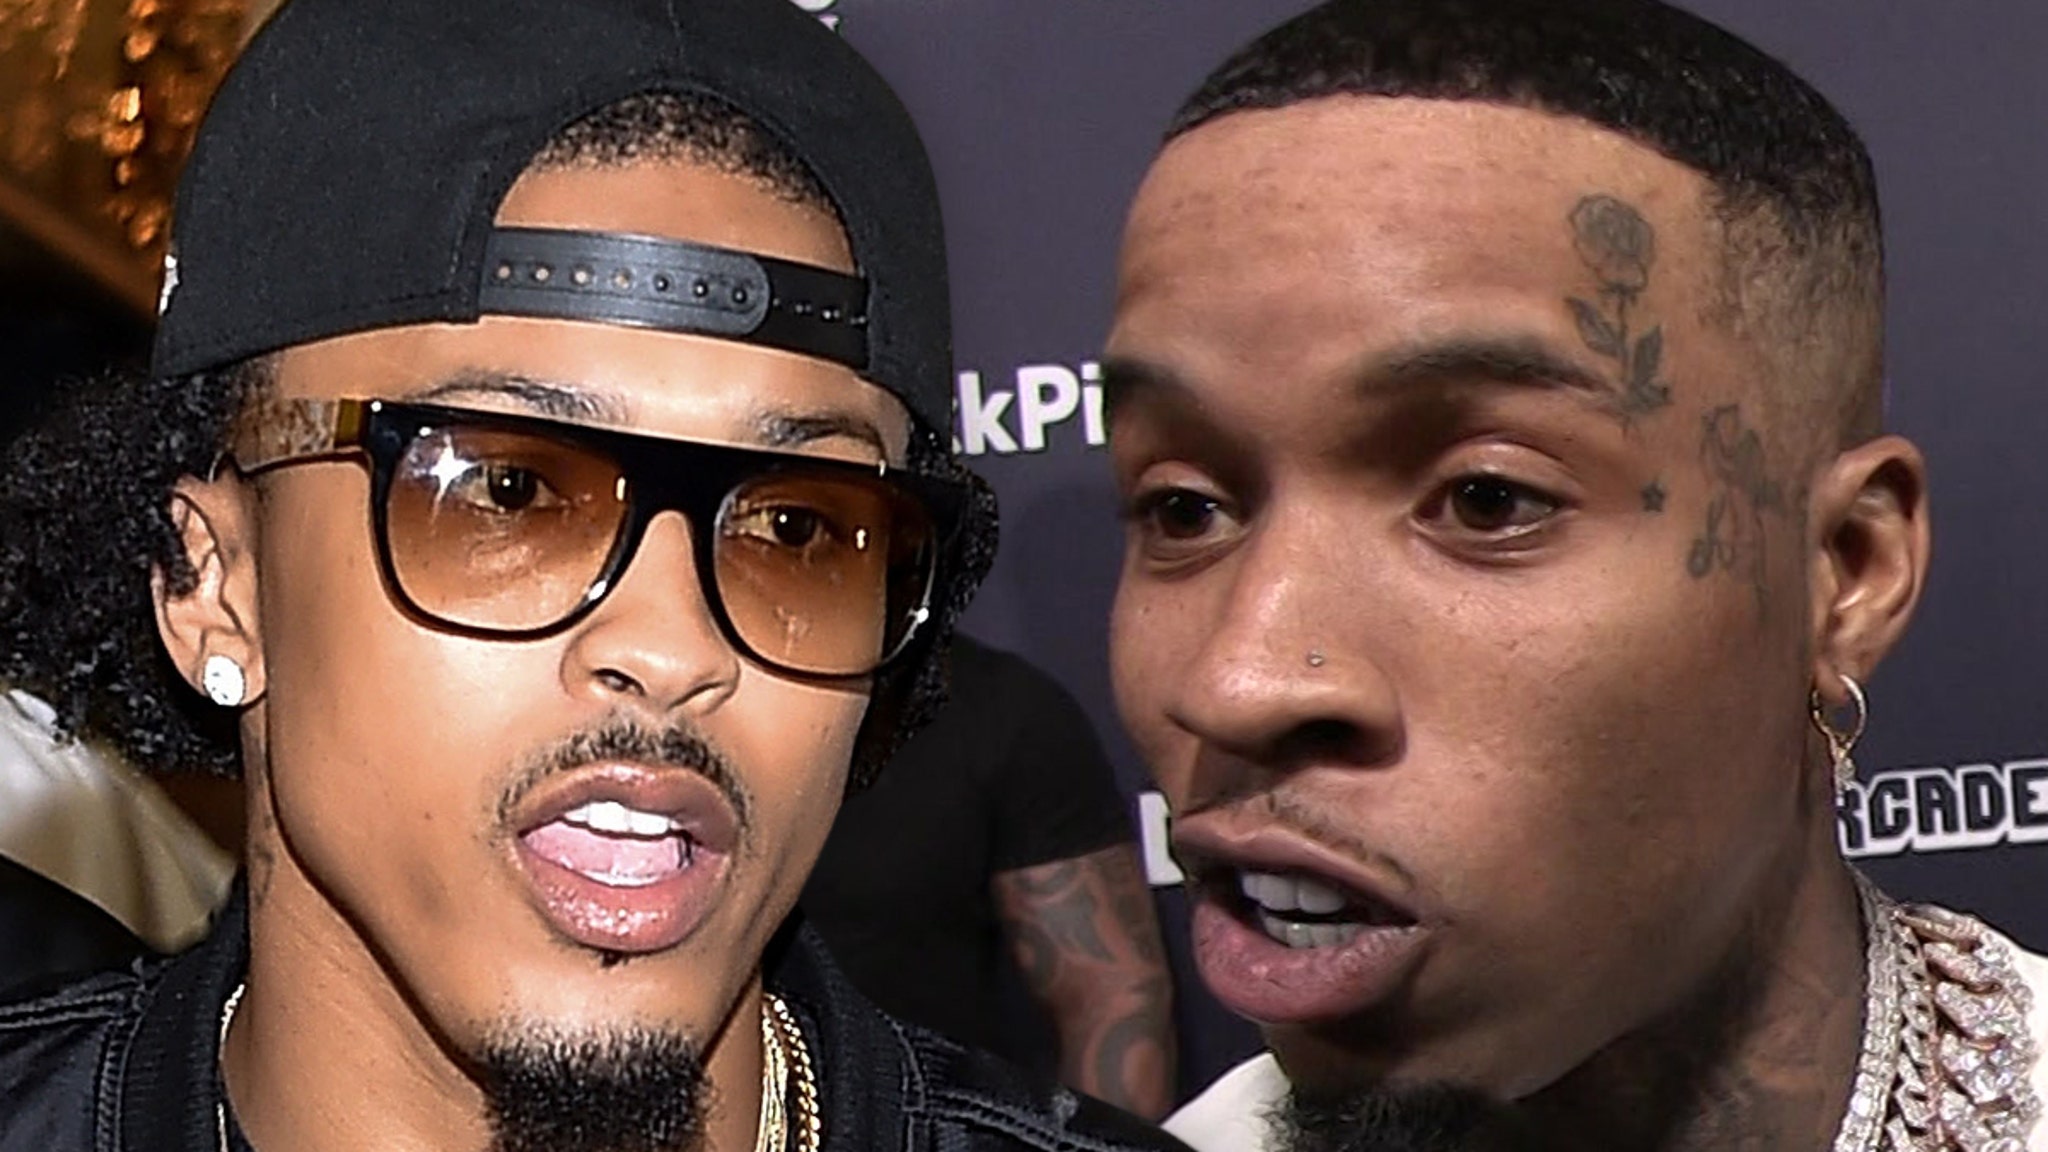 August Alsina Claims Tory Lanez Hit Him, Posts Photo of Bloody Mouth #ToryLanez